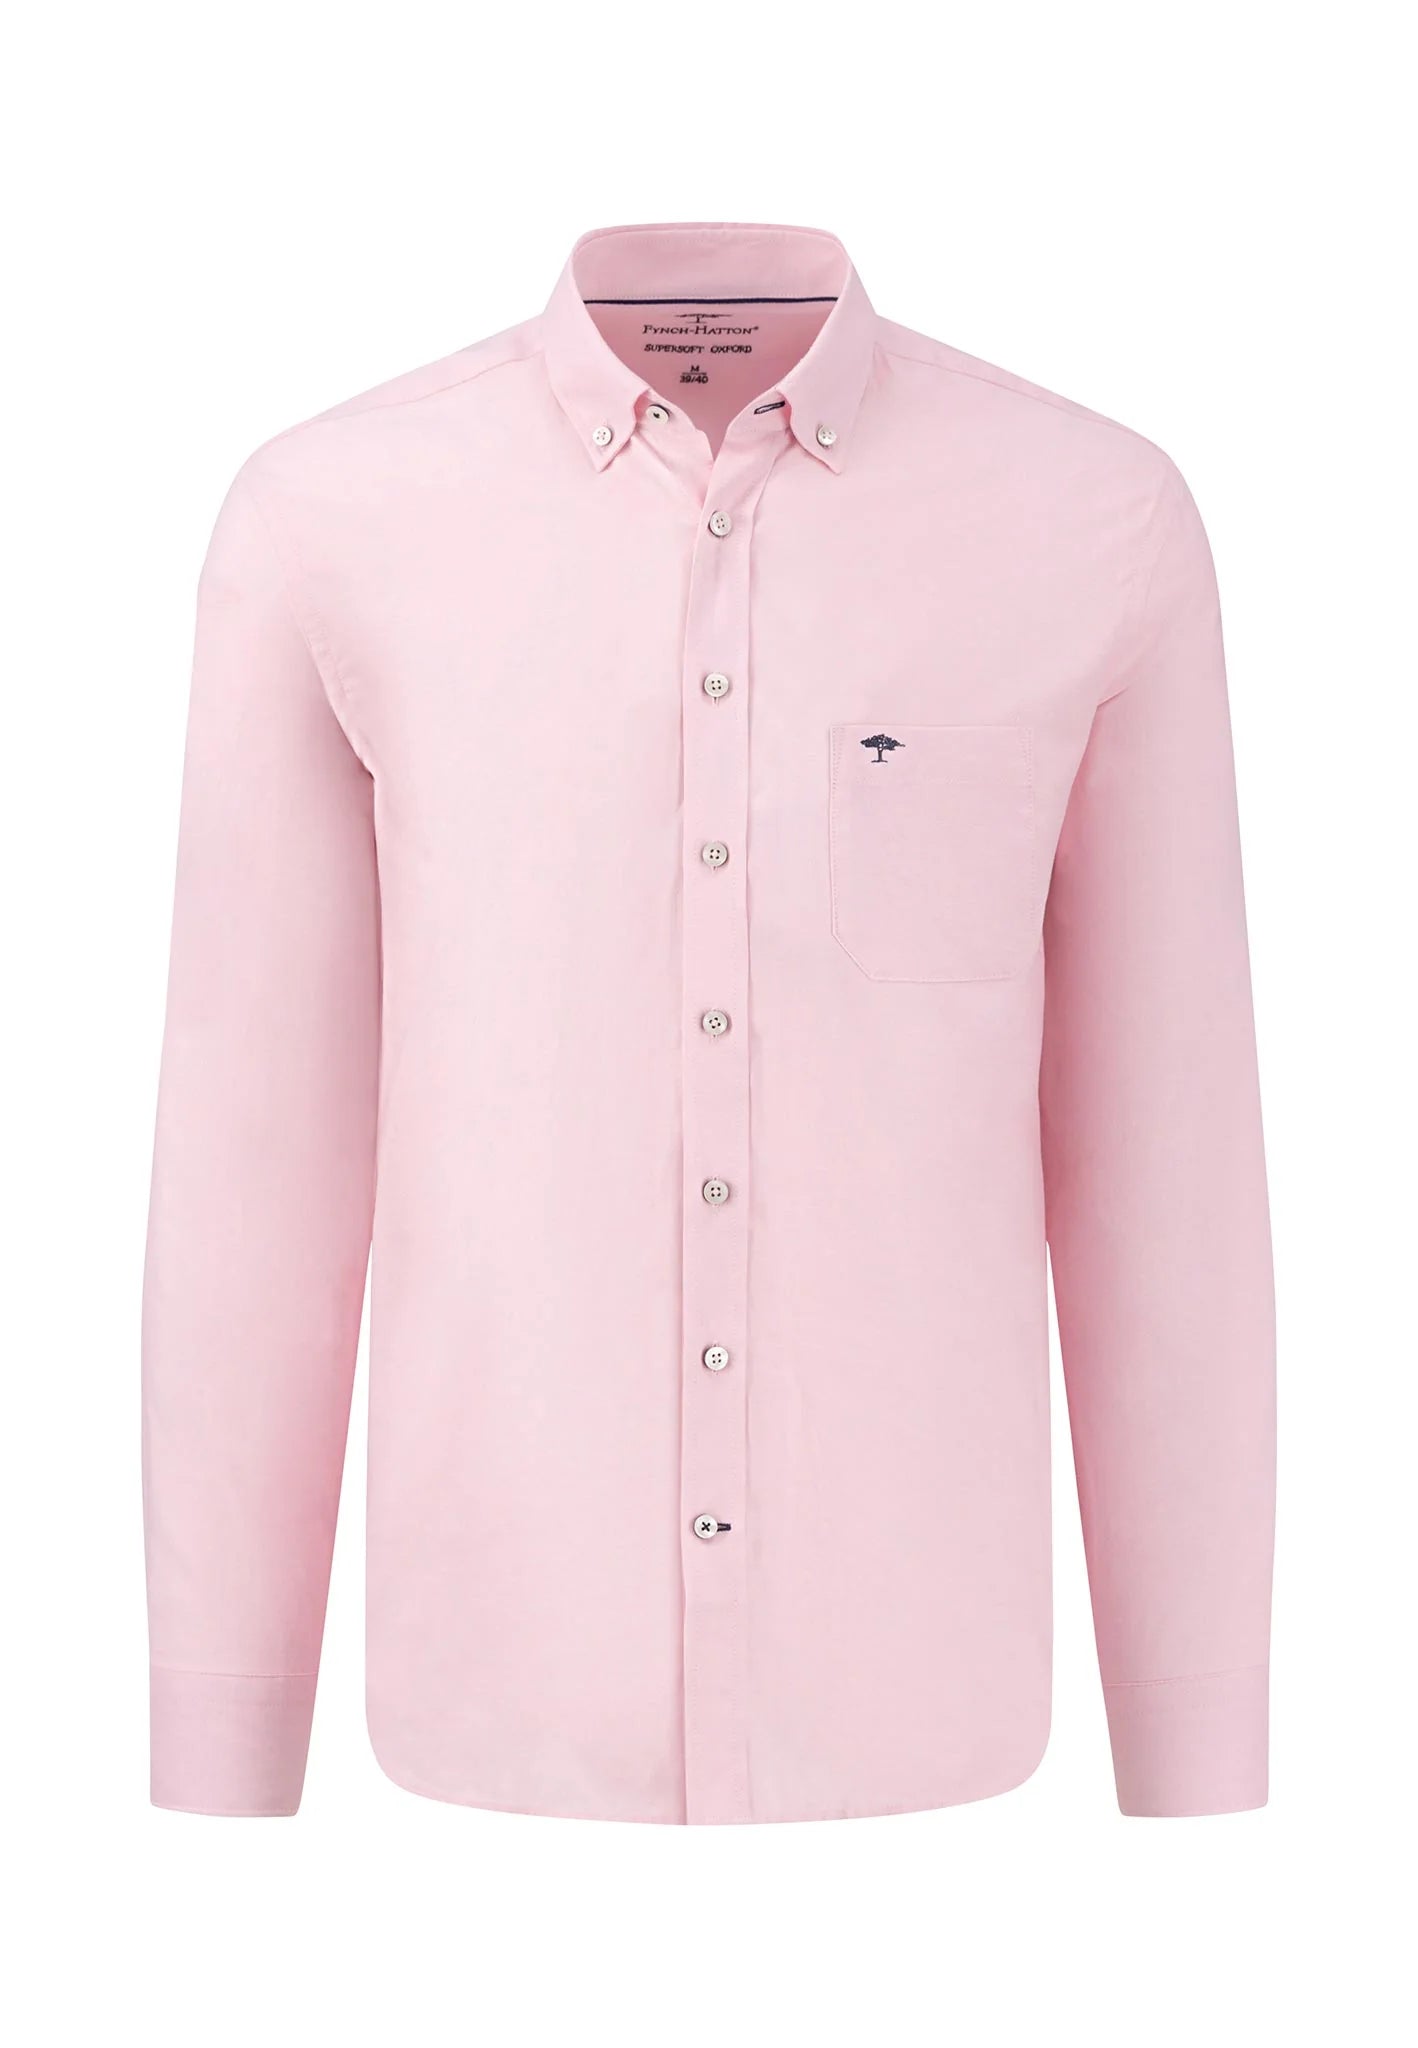 Made Of Oxford – Cotton, Pink Soft FYNCH-HATTON